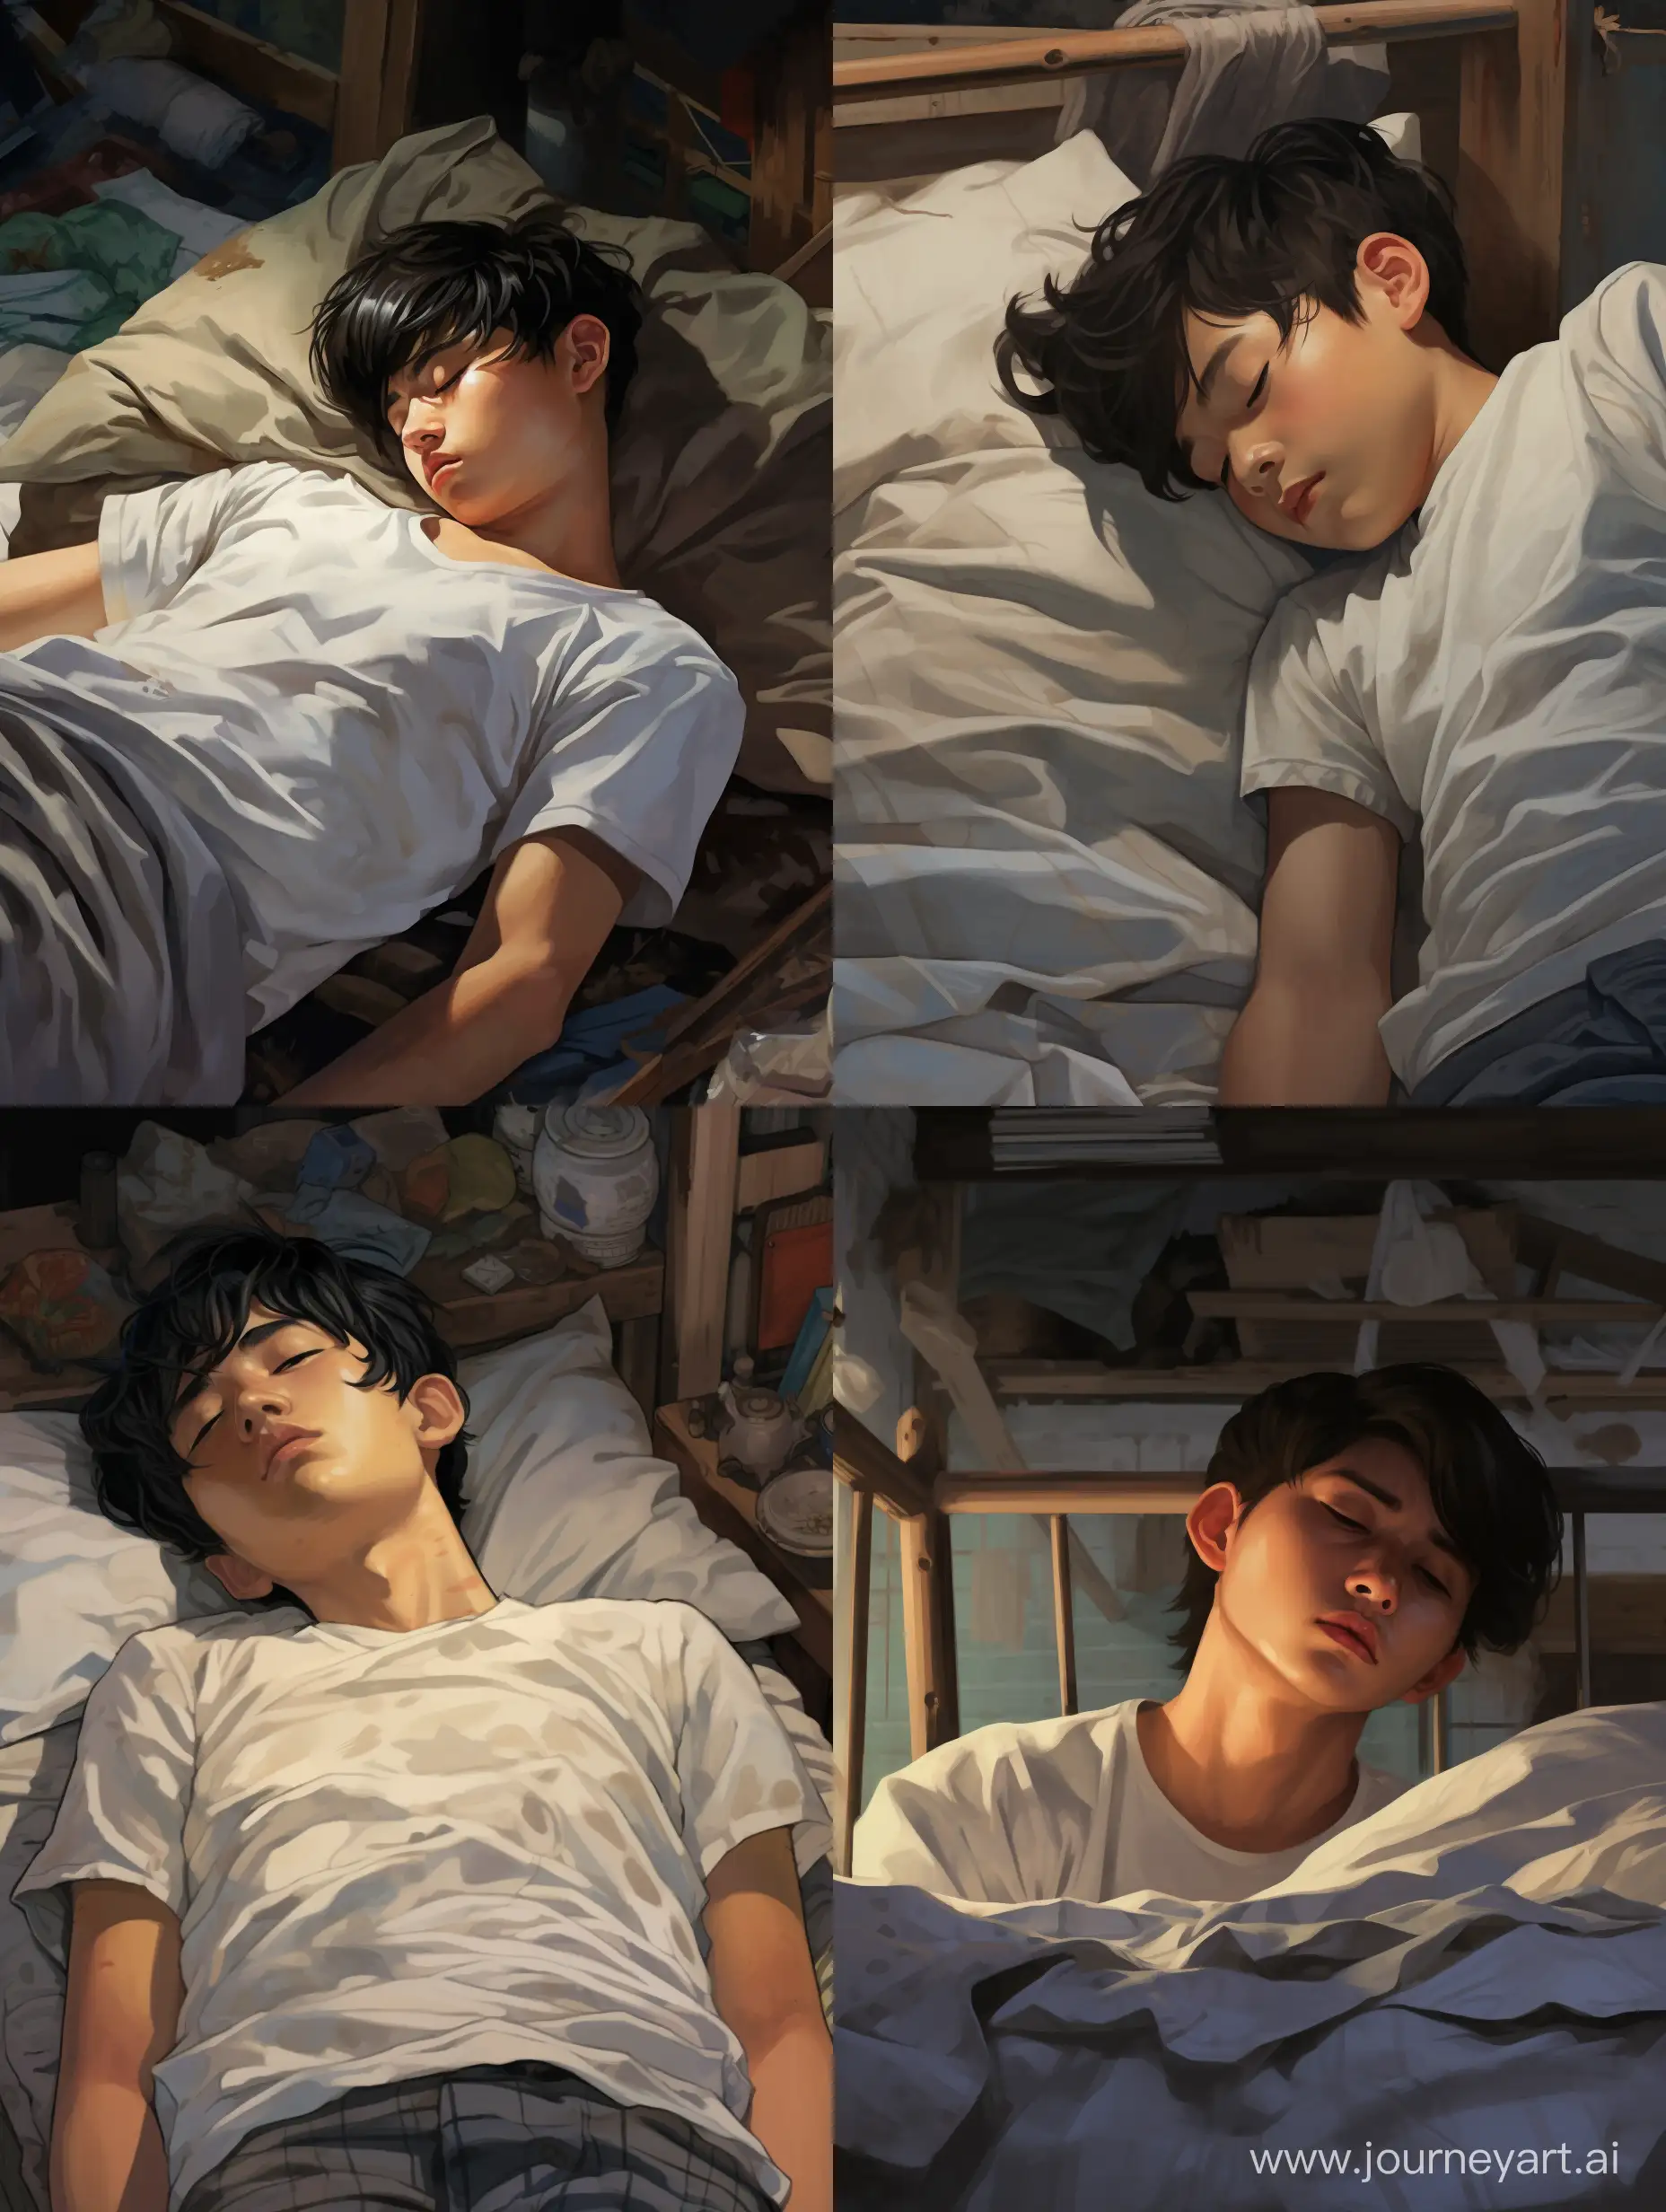 everything can be seen at a distance of 4 meters from an ordinary boy who is 180 cm tall, Asian, his face is not visible, but his features are clearly visible, his hair covers his eyes, black desert, black hair, he sleeps in a white t-shirt, he is spread out in bed, turned to the left side, the hand is under the desert, in the dark without light in the room, sleeping, the blanket is black, the blanket is covered to the waist of the body
